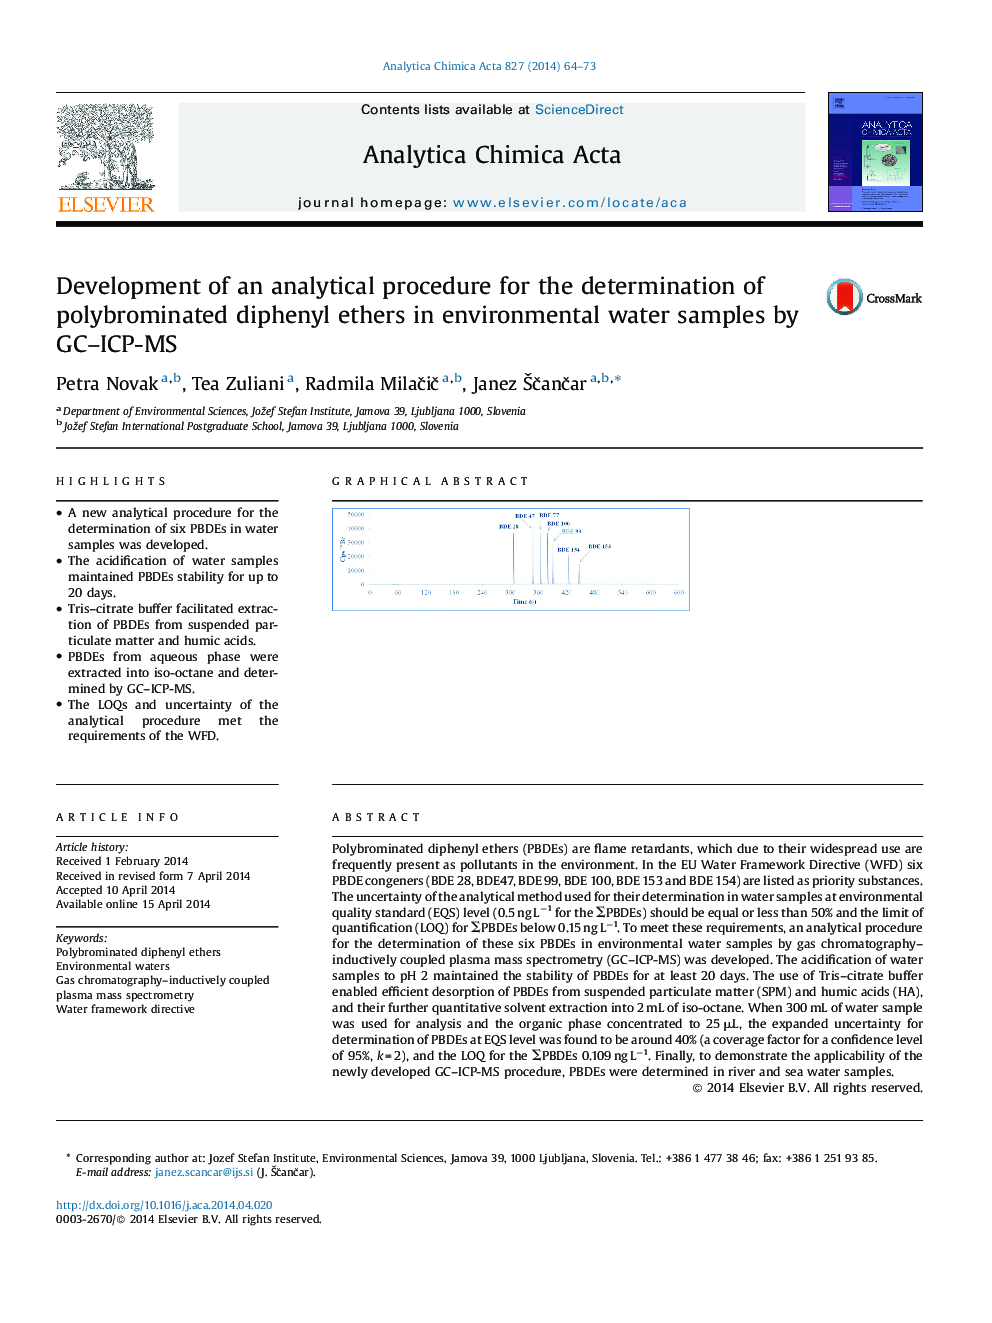 Development of an analytical procedure for the determination of polybrominated diphenyl ethers in environmental water samples by GC–ICP-MS